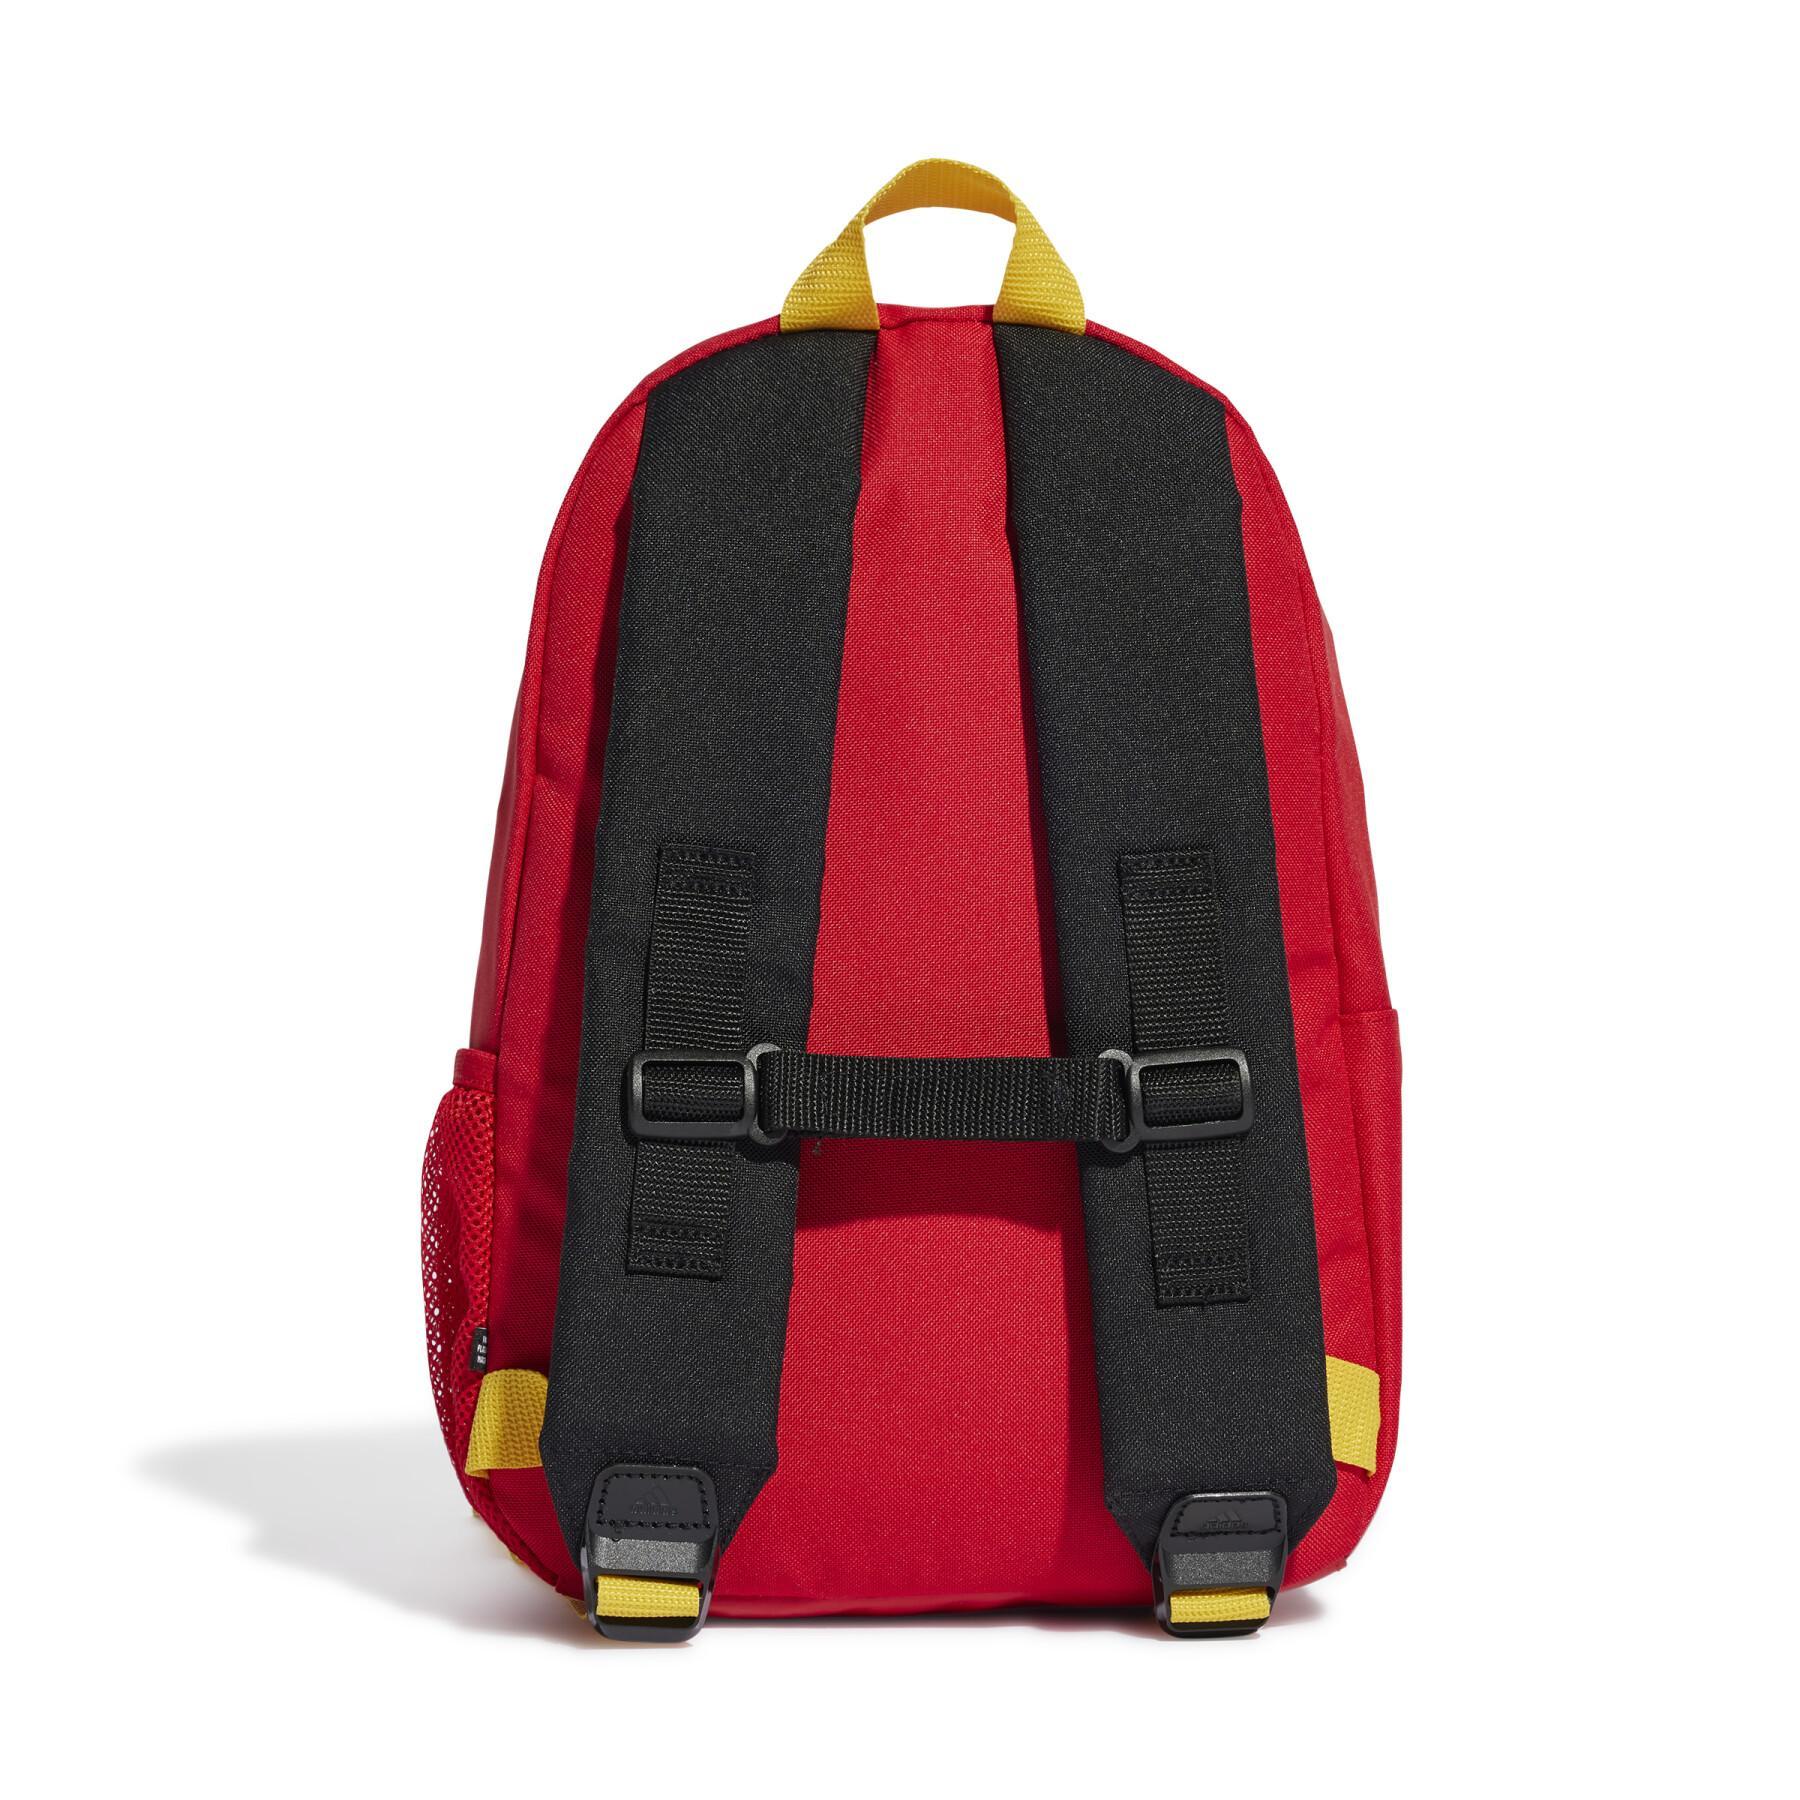 Backpack adidas X Disney Mickey Mouse